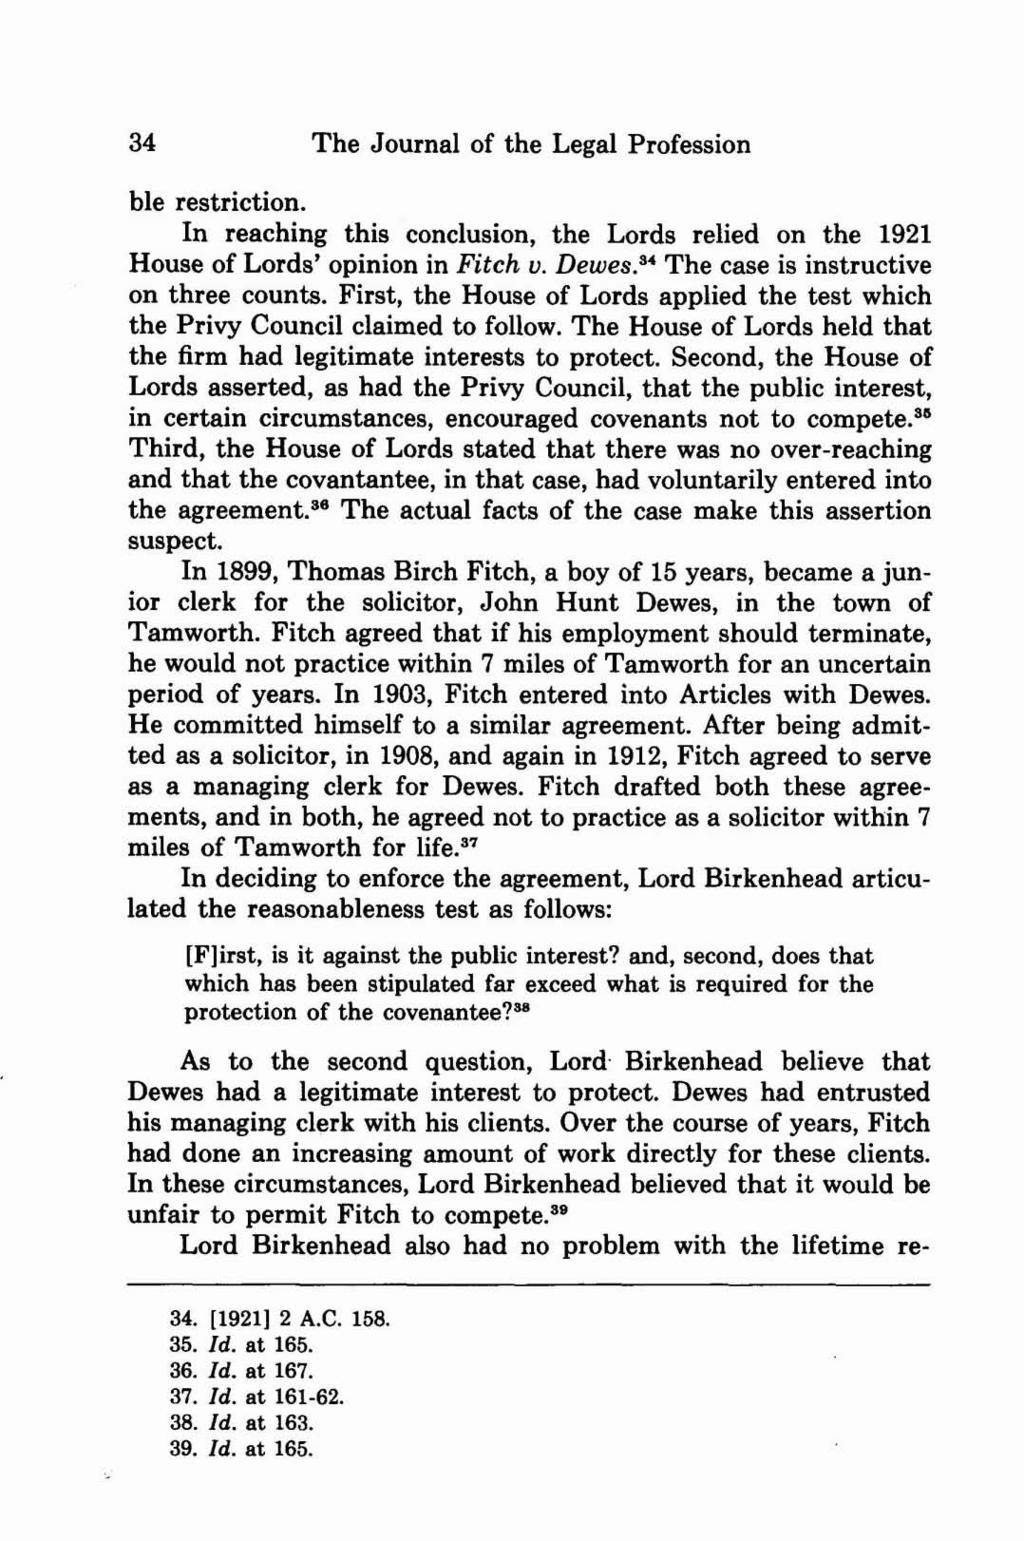 34 The Journal of the Legal Profession ble restriction. In reaching this conclusion, the Lords relied on the 1921 House of Lords' opinion in Fitch u. Dewe~.~' The case is instructive on three counts.